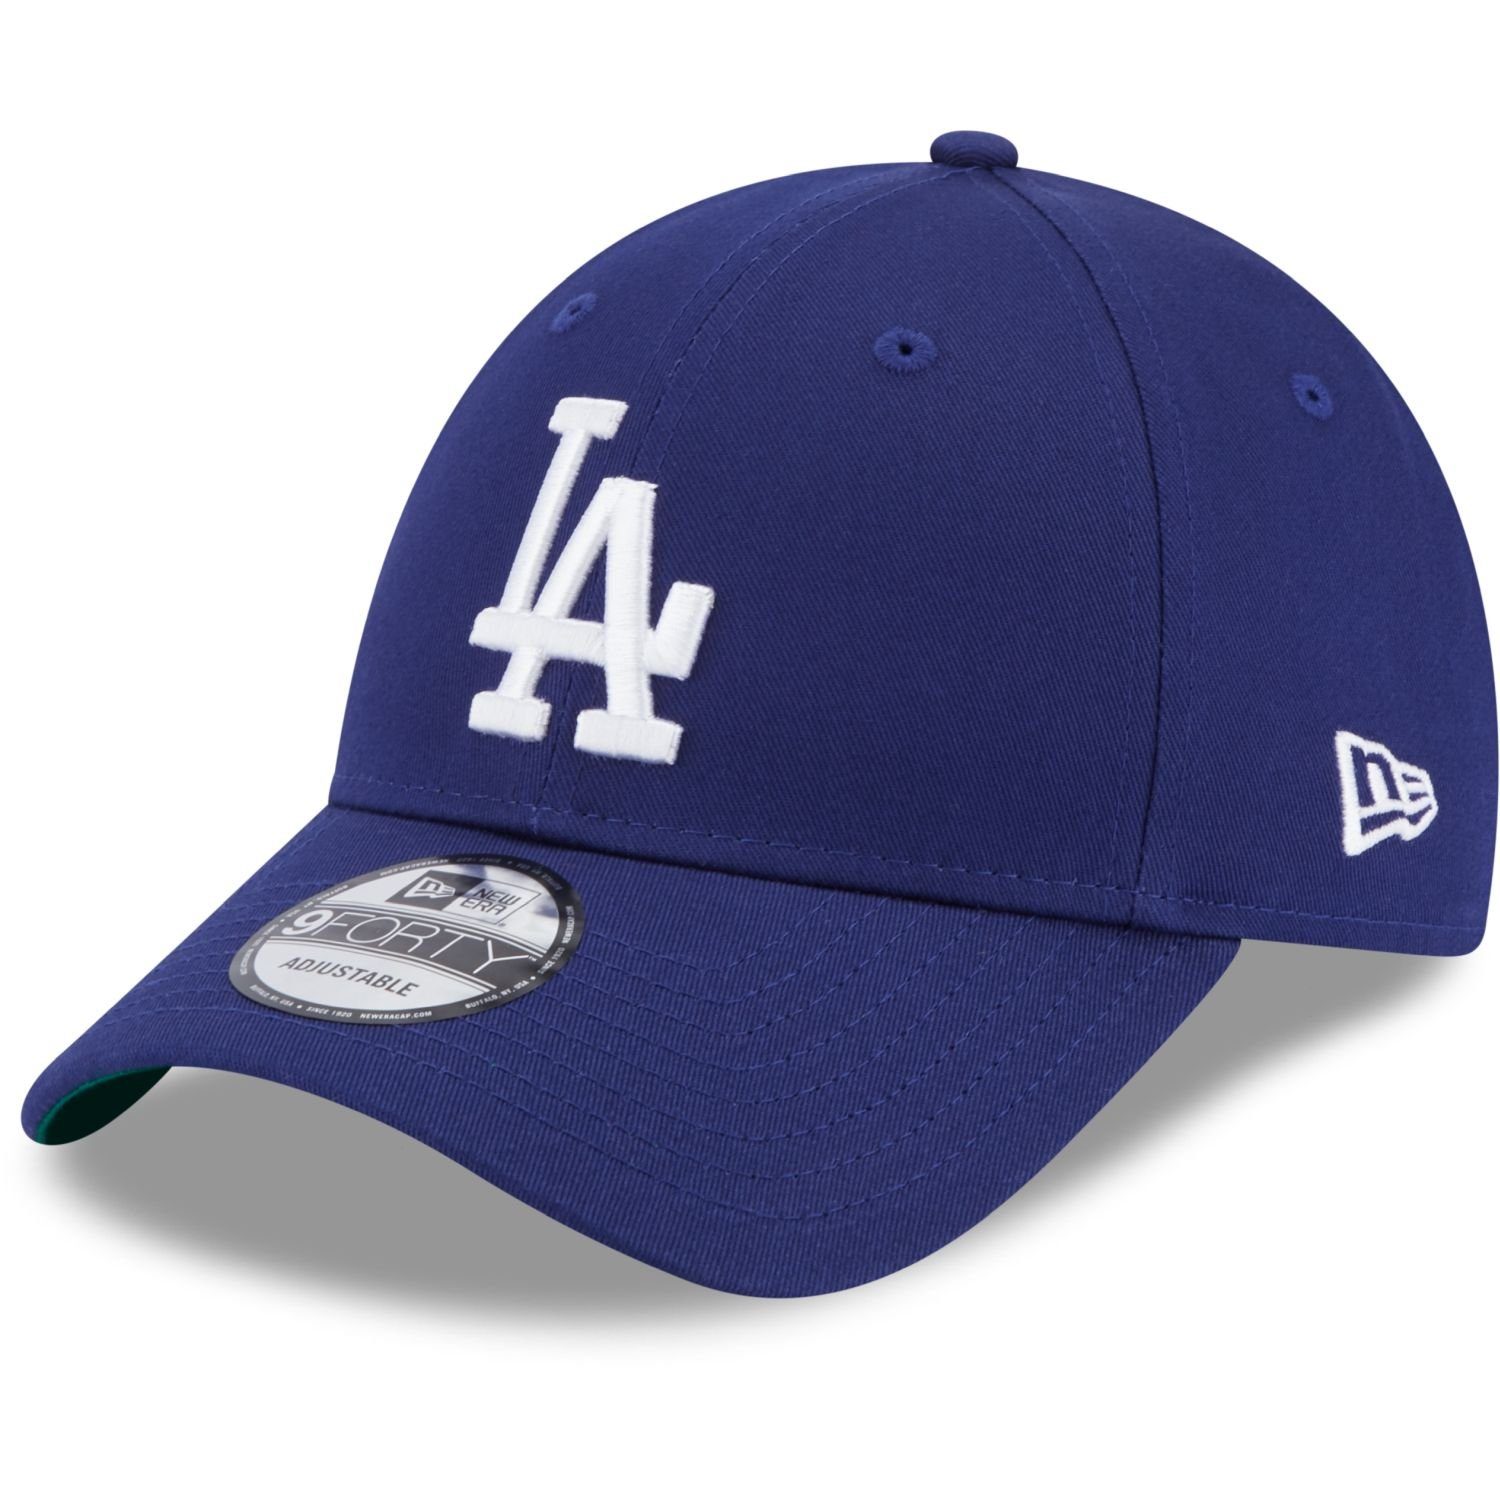 SIDEPATCH Los Angeles Baseball Cap Dodgers Strapback Era New 9Forty